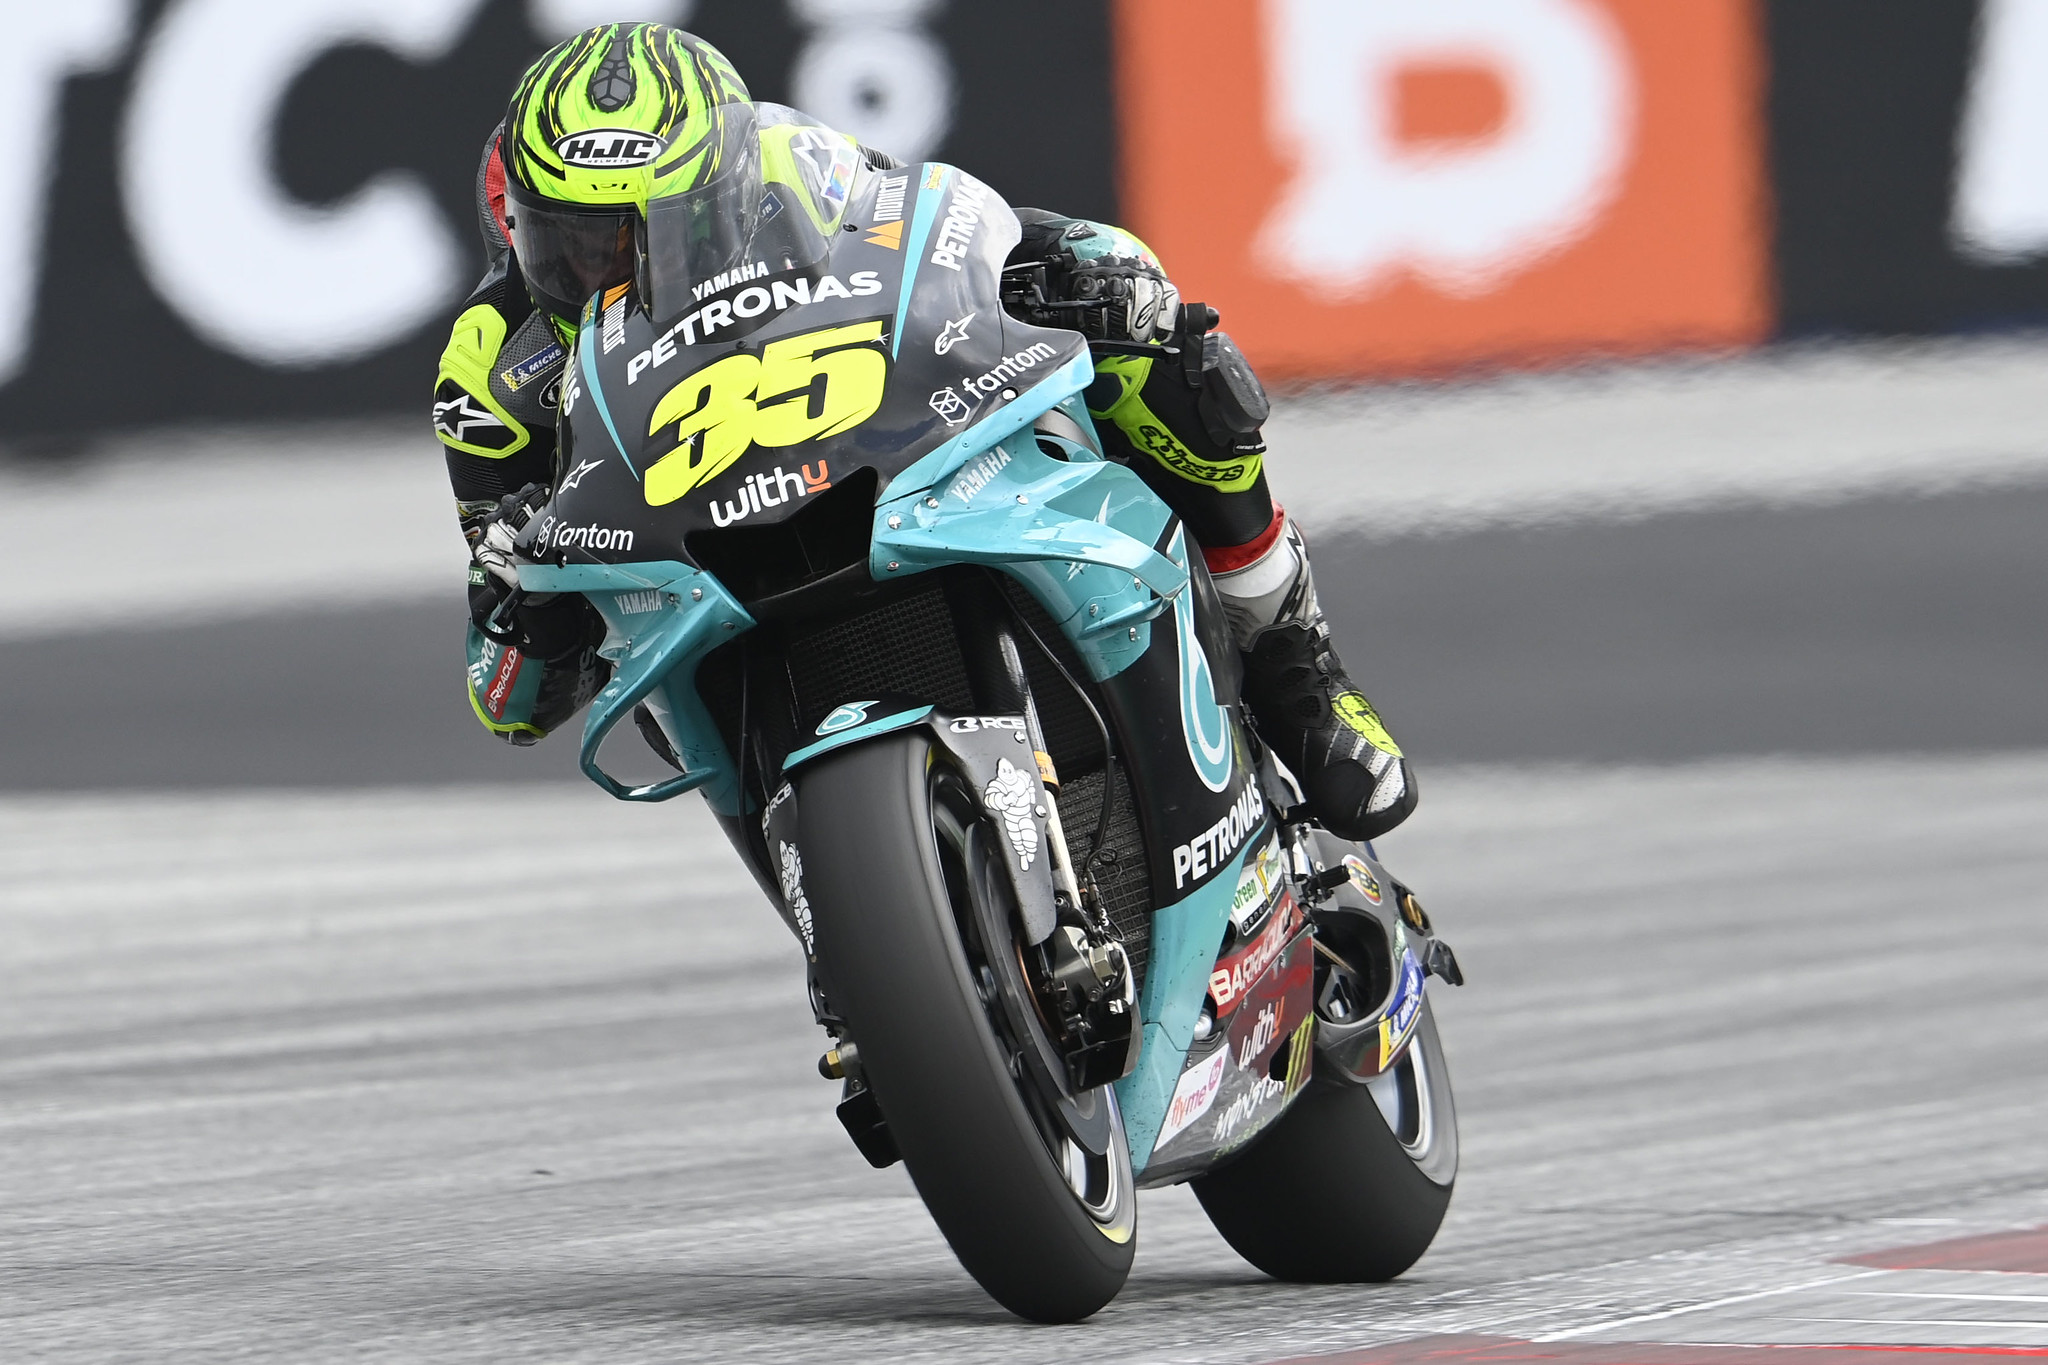 Cal Crutchlow 17th in dramatic race at Spielberg